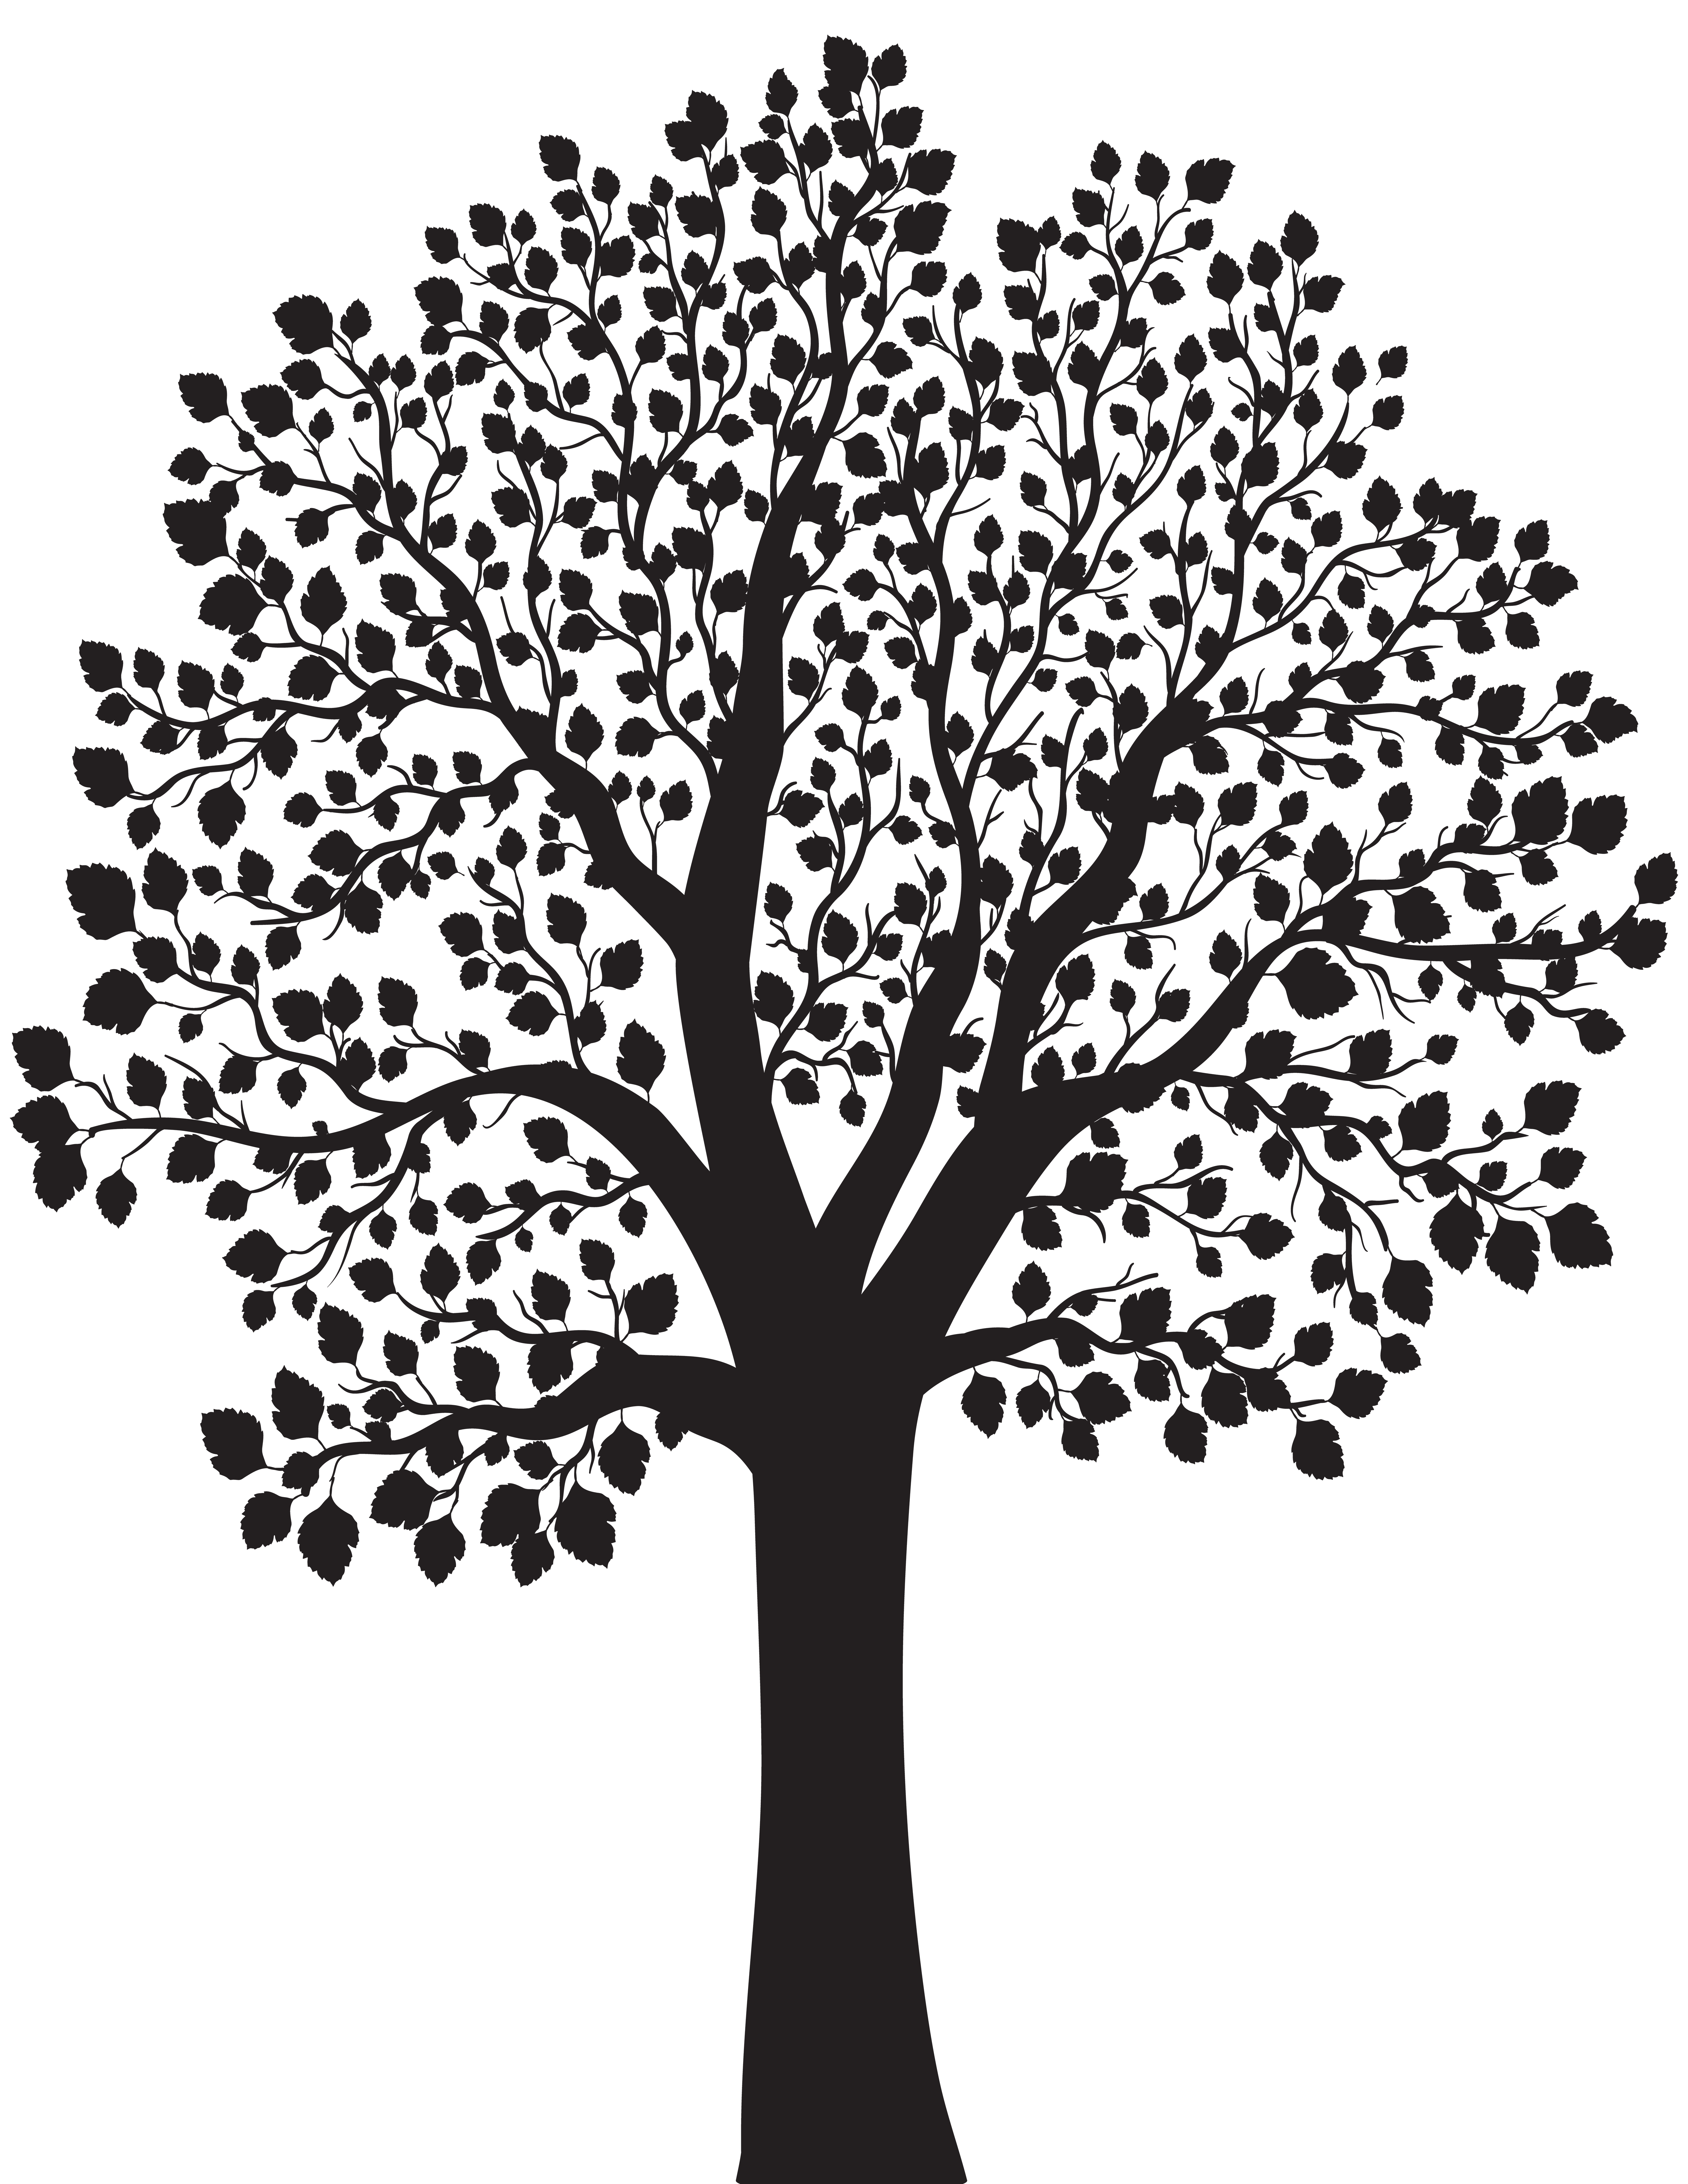 Tree Silhouette PNG Clip Art Image | Gallery Yopriceville - High